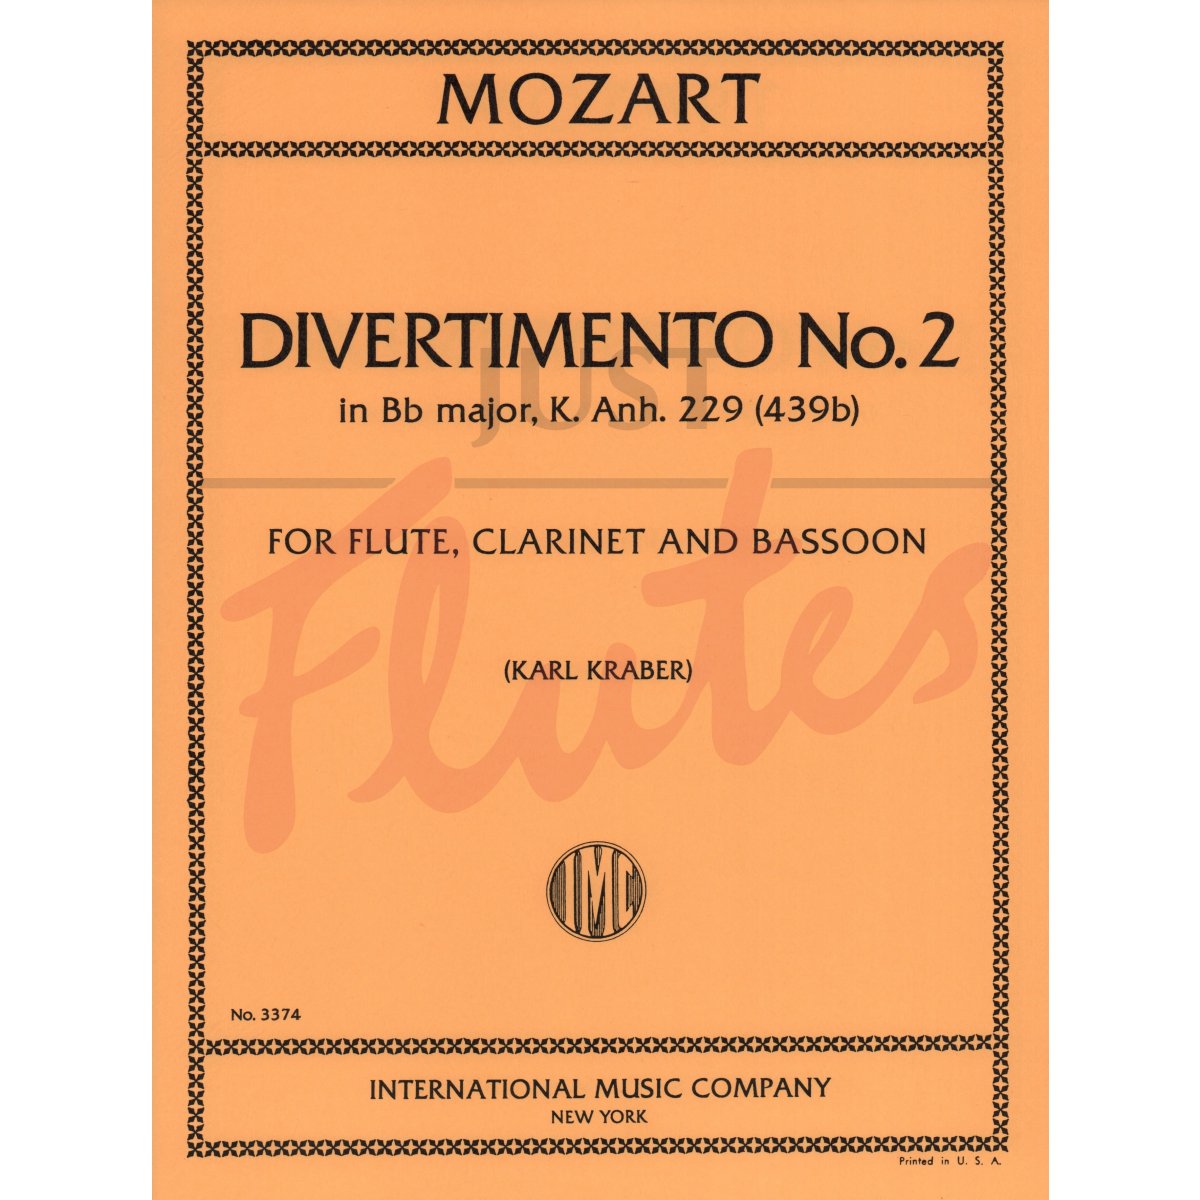 Divertimento No.2 in Bb major for Flute, Clarinet and Bassoon